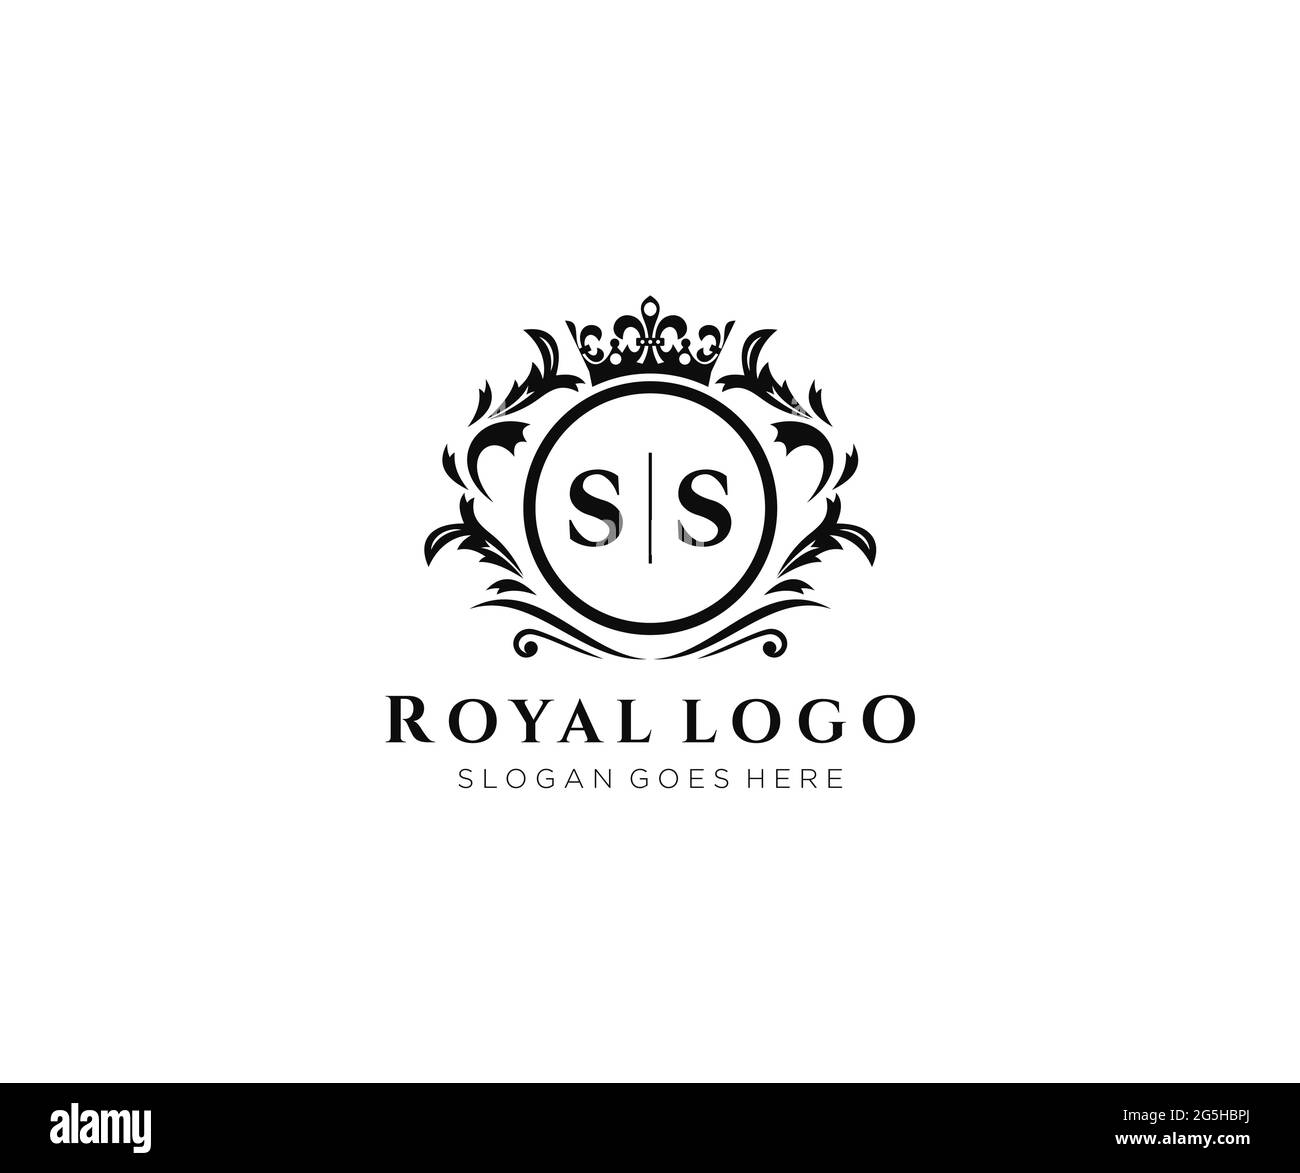 Ss brand logo Black and White Stock Photos & Images - Alamy